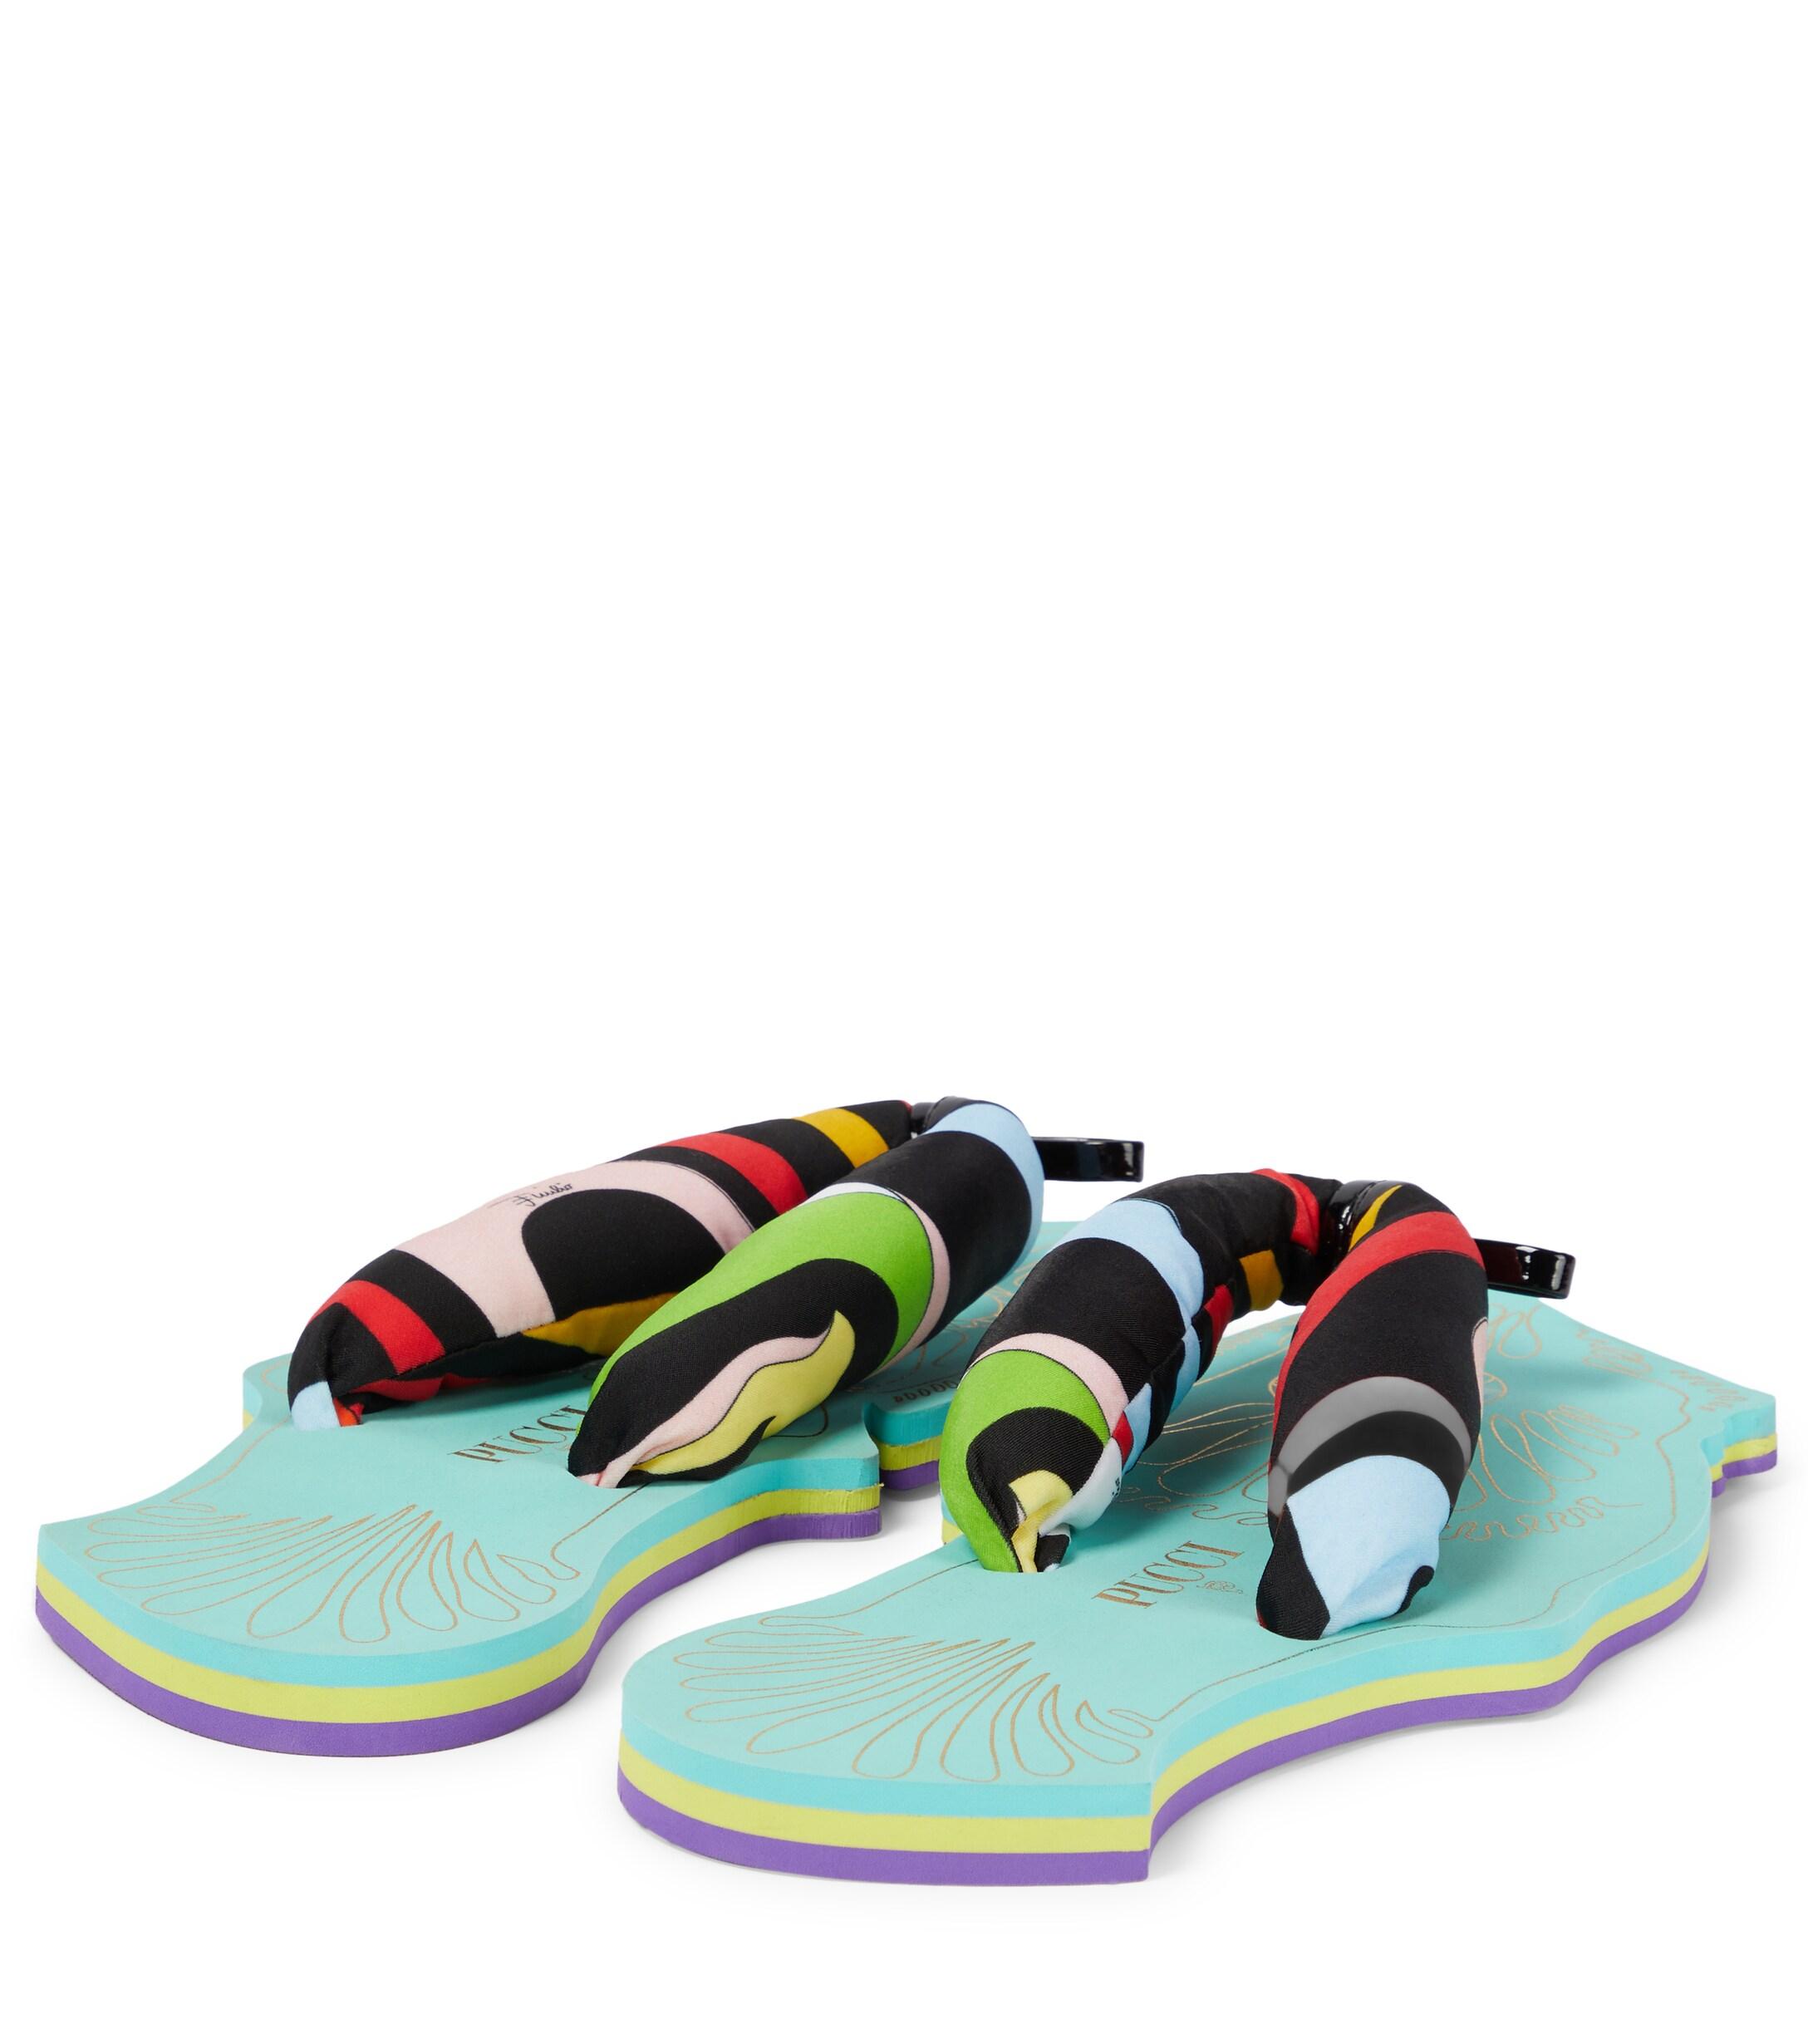 Emilio Pucci Rubber Printed Fabric Thong Sandals | Lyst